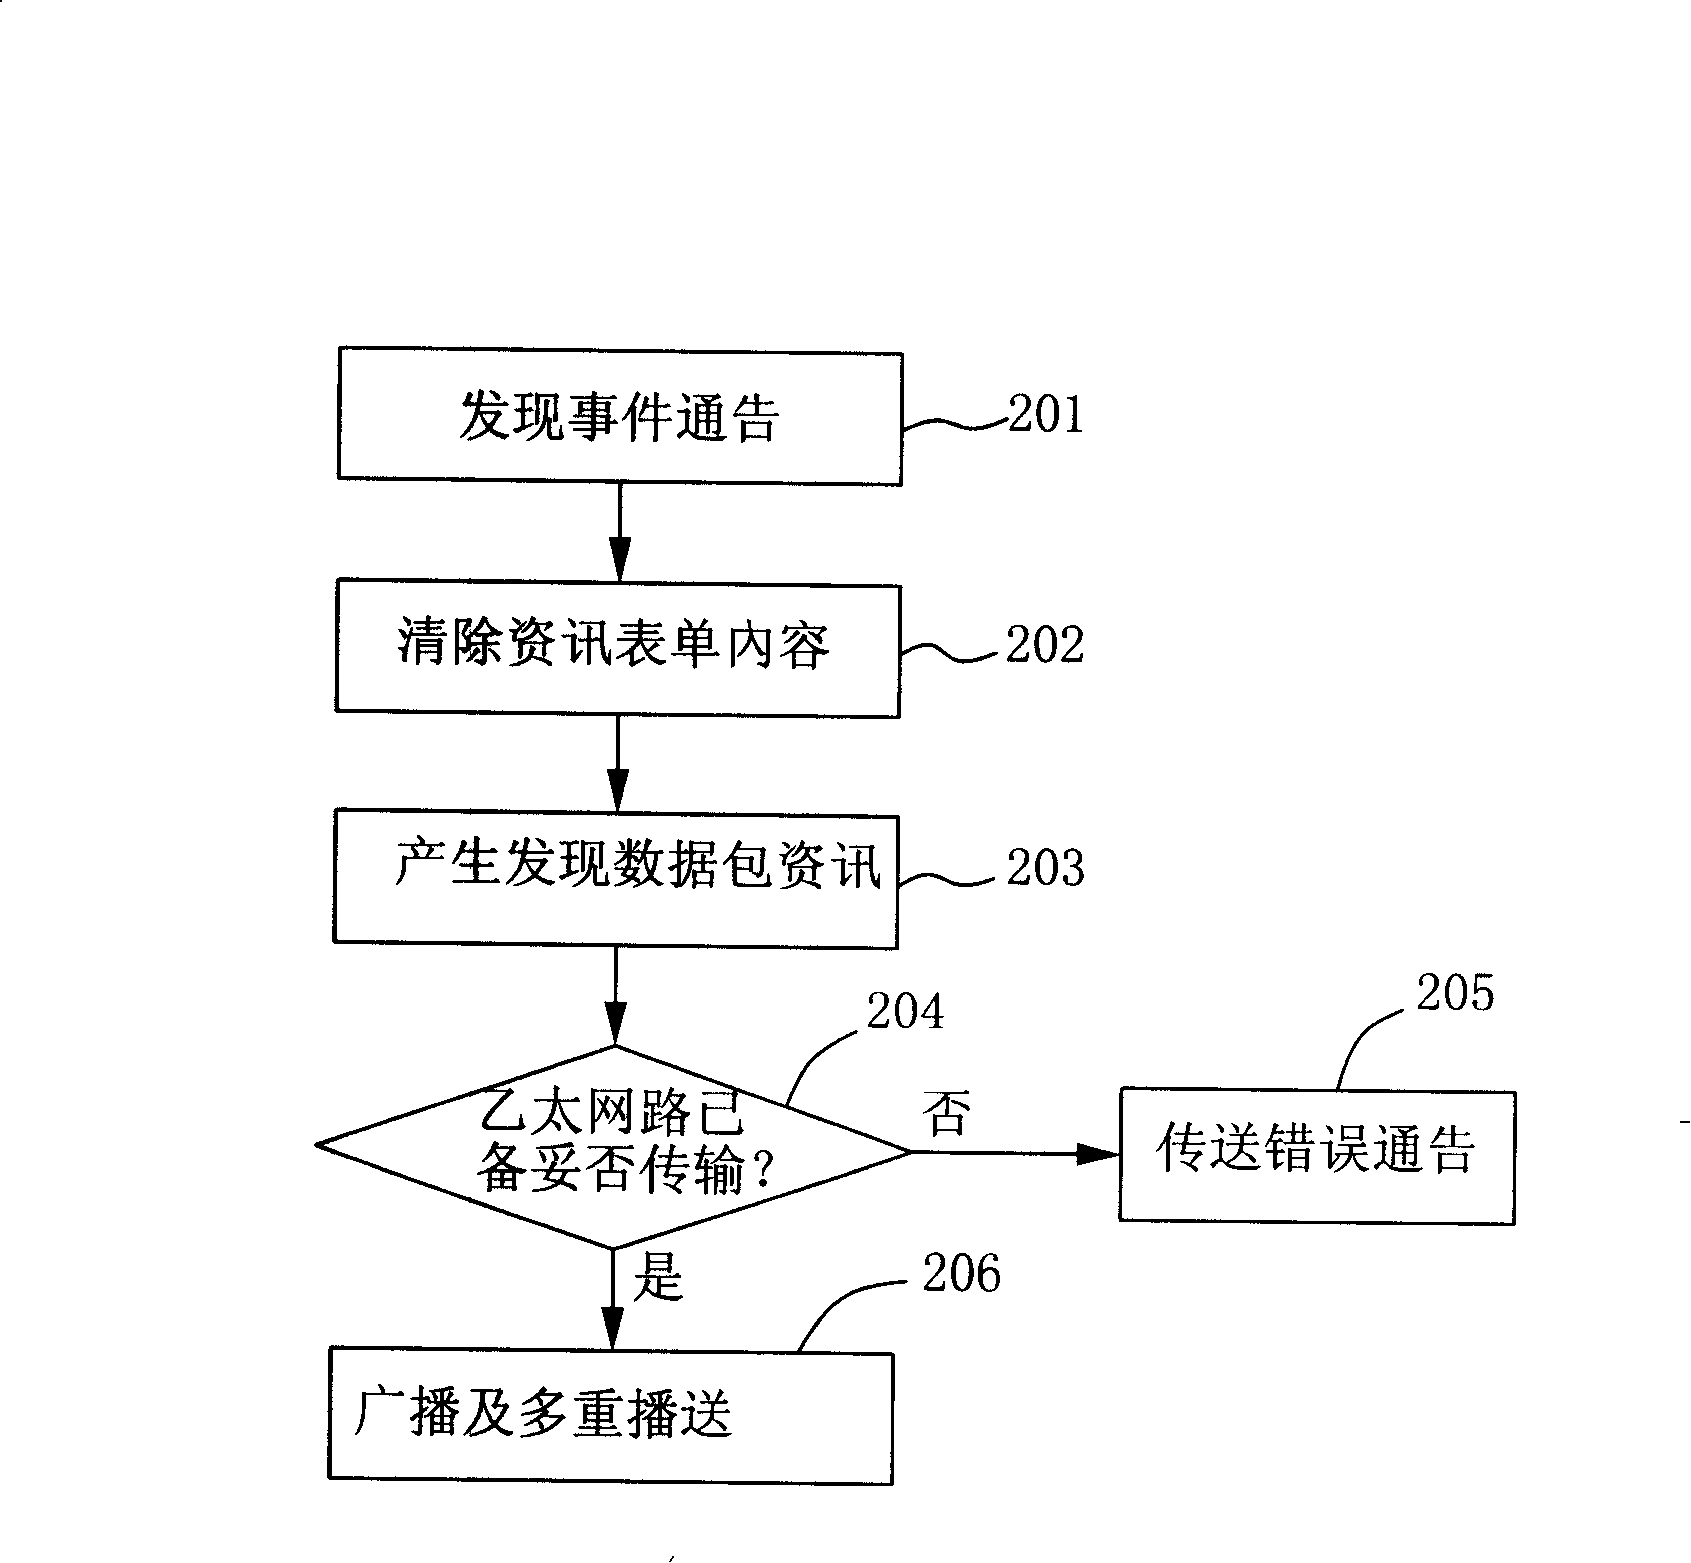 Network apparatus discover method